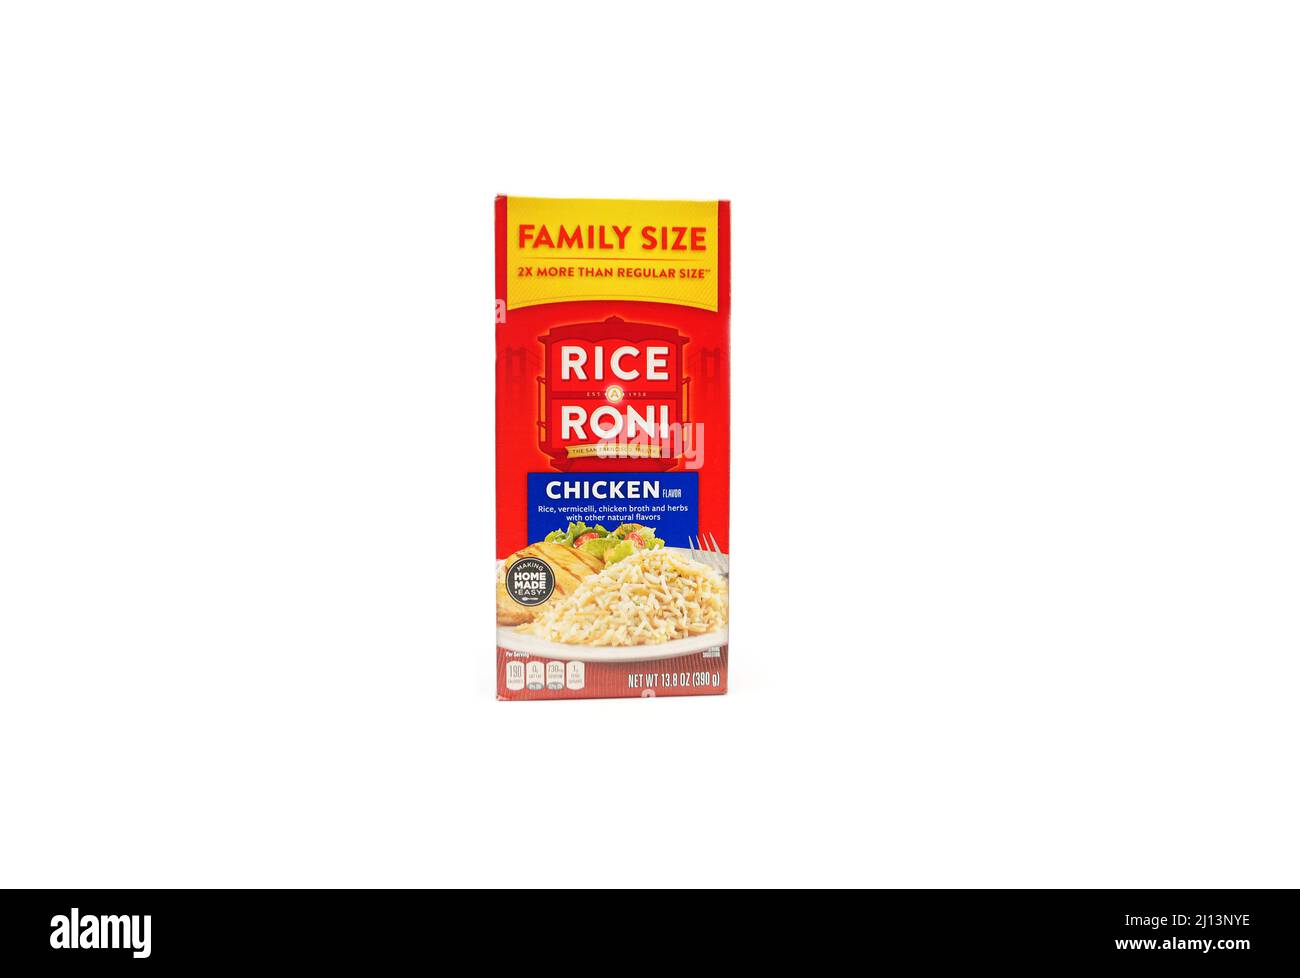 Rice a Roni Chicken Flavored Rice Mix - Family Size Stock Photo